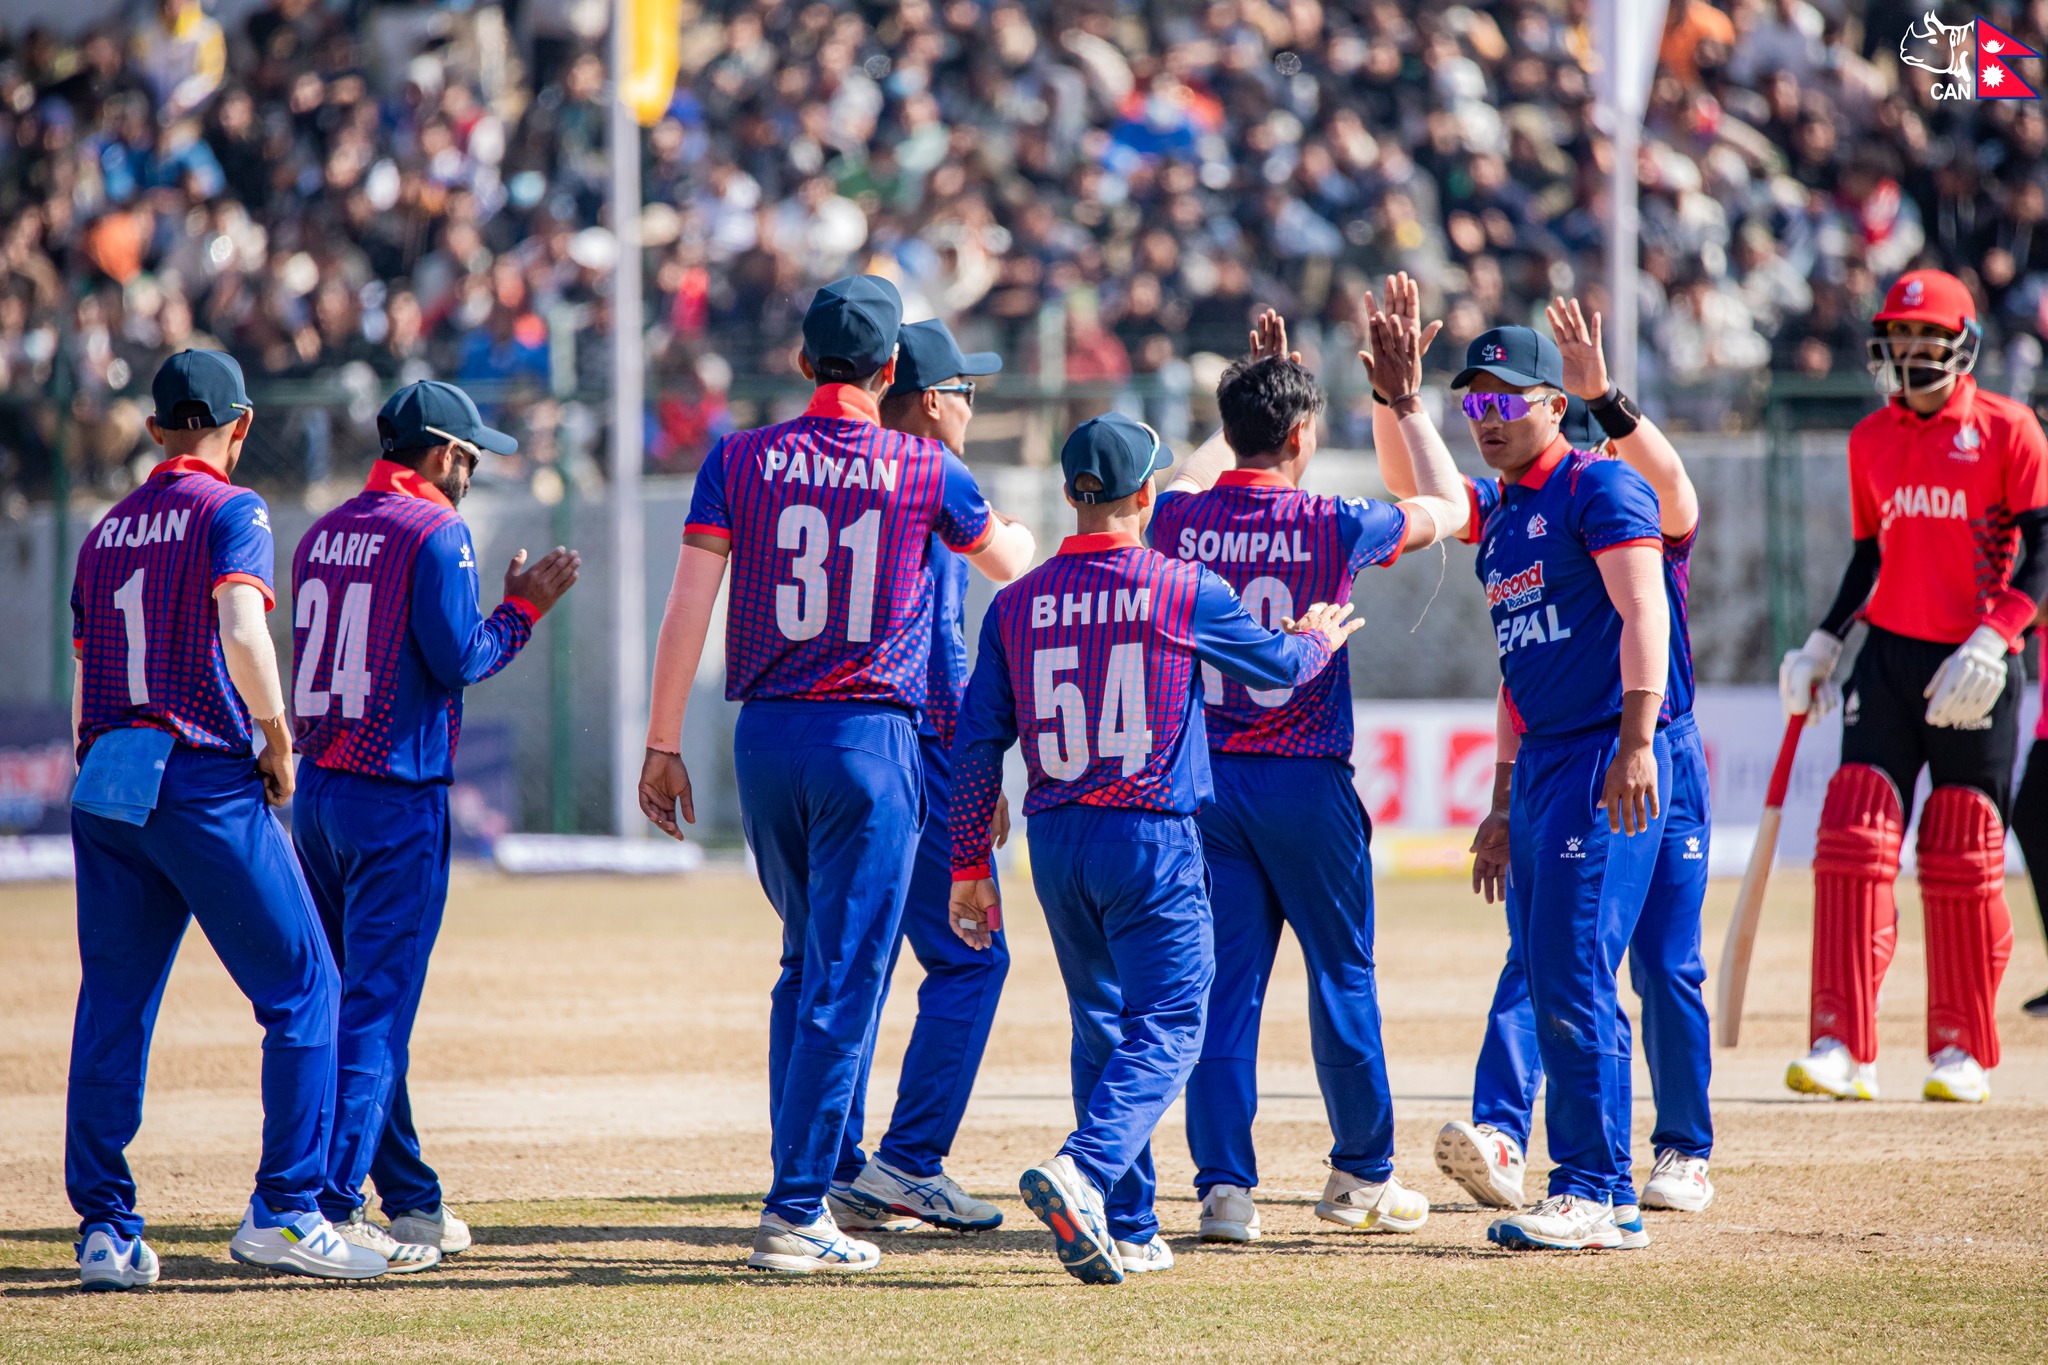 Nepal’s thrilling victory over Canada